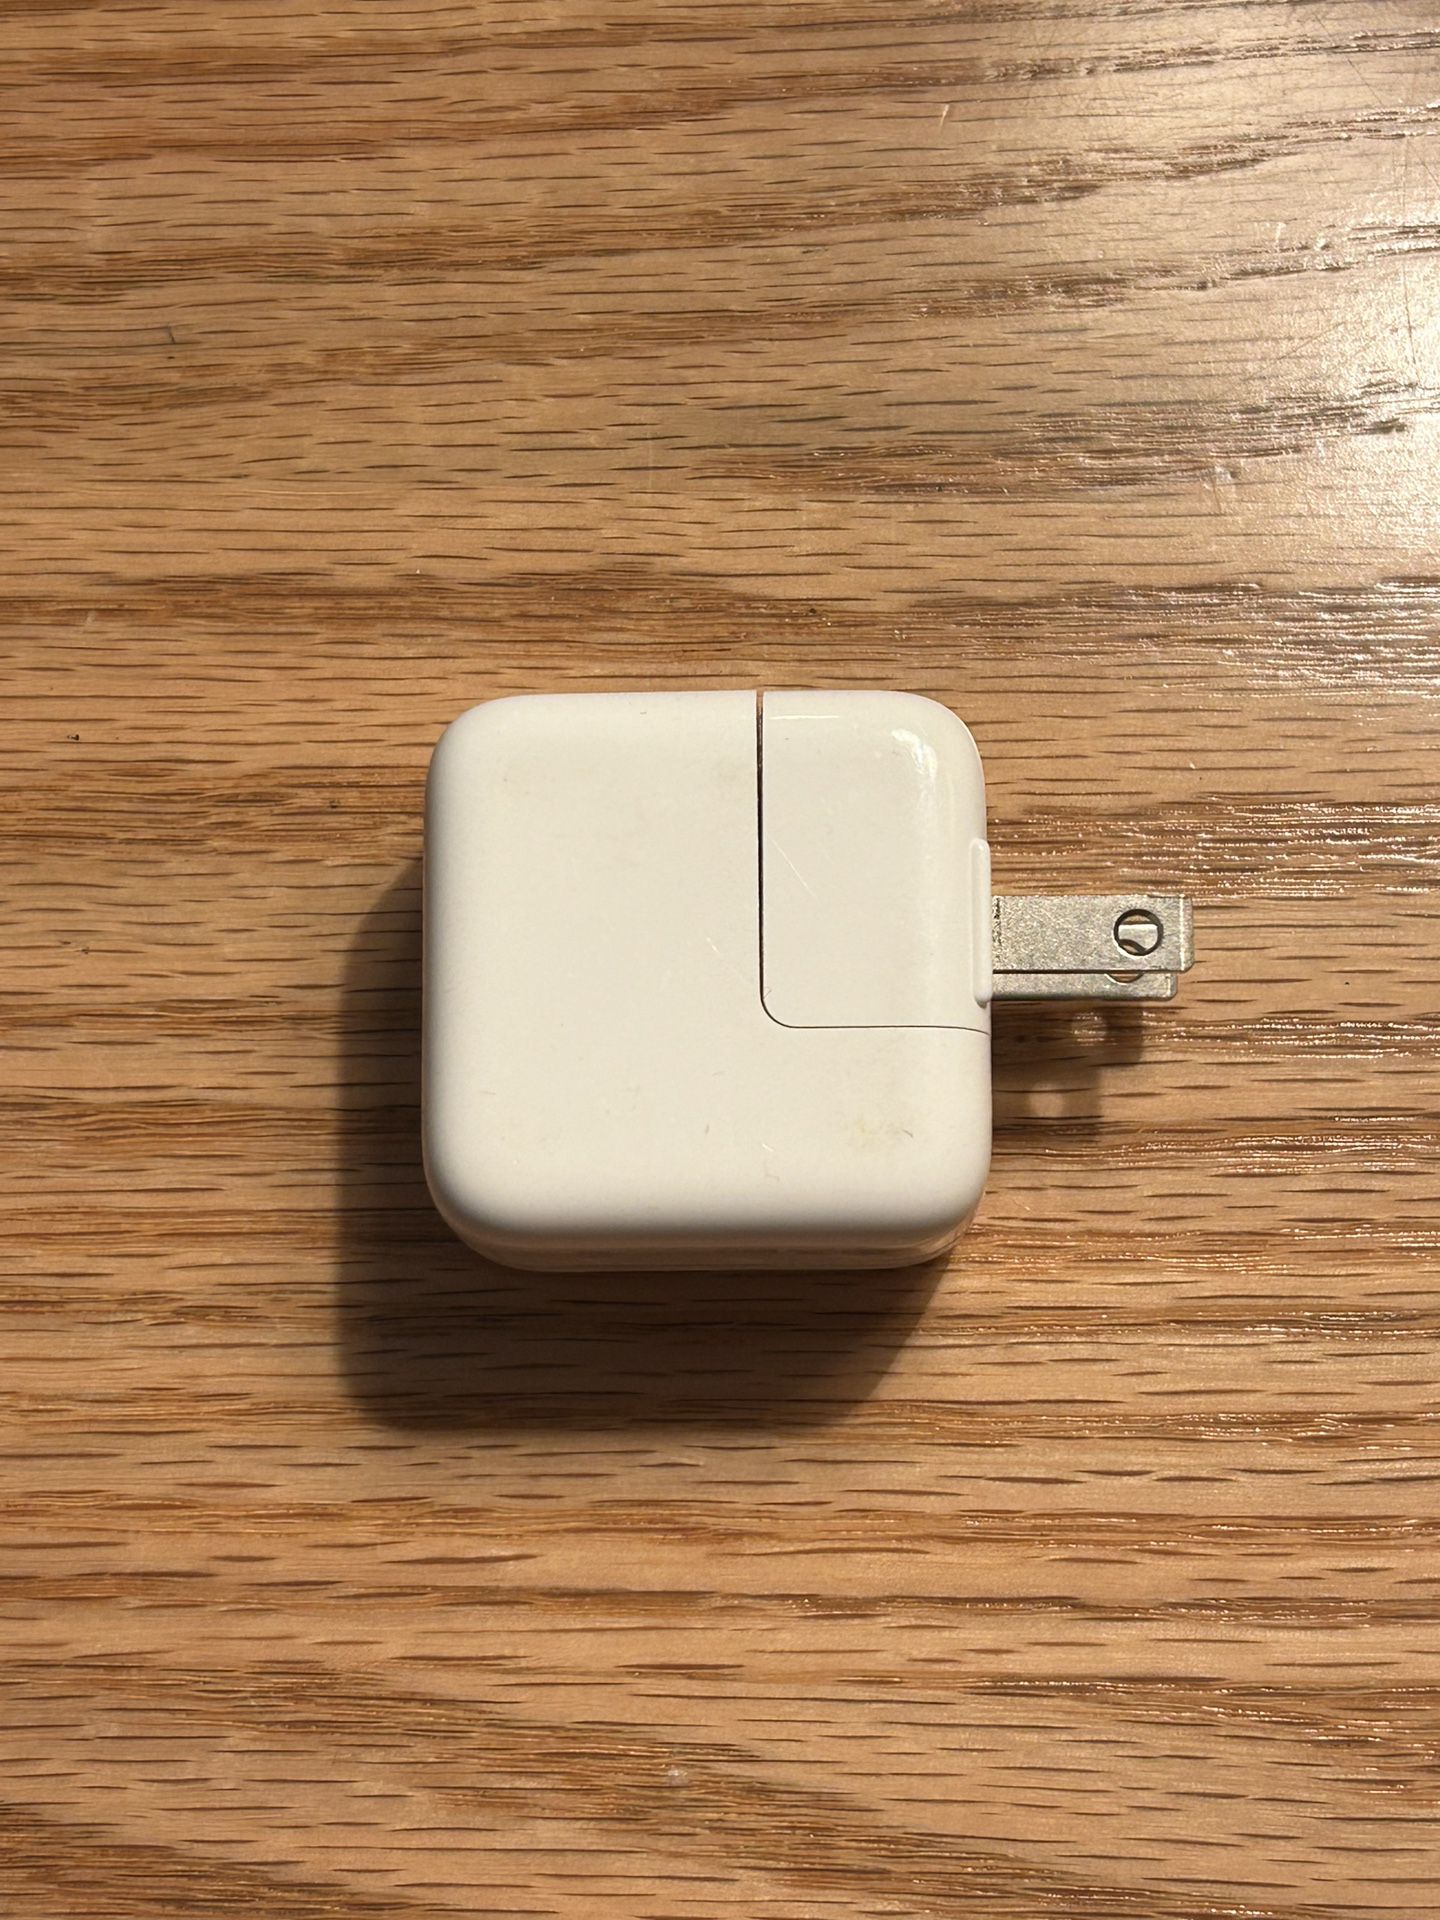 iPad/iPhone Charger Cube